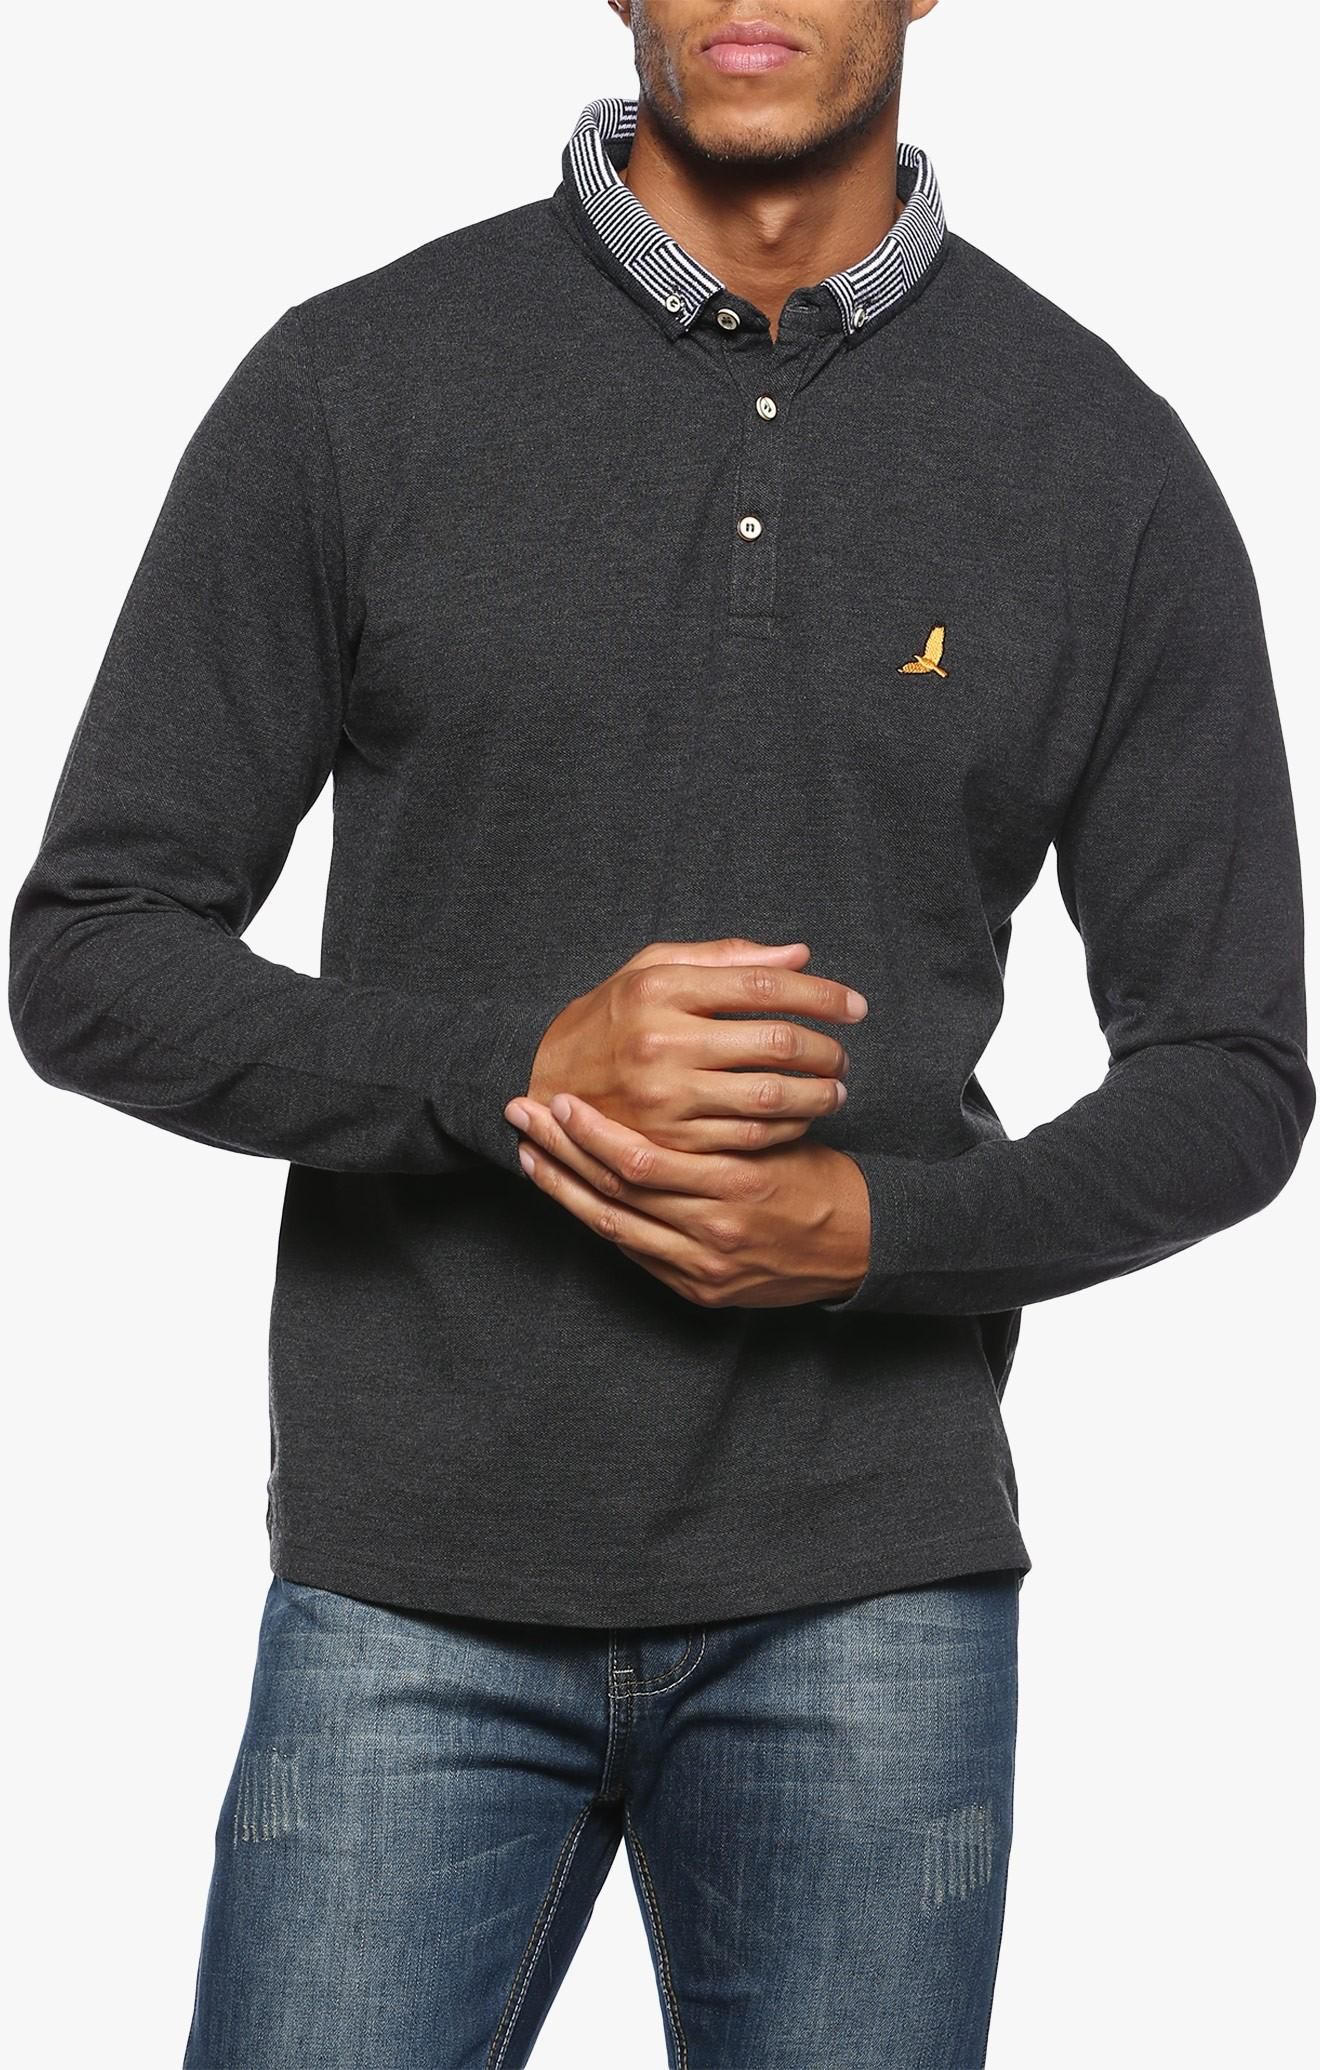 Charcoal Patterned Collar Polo Shirt